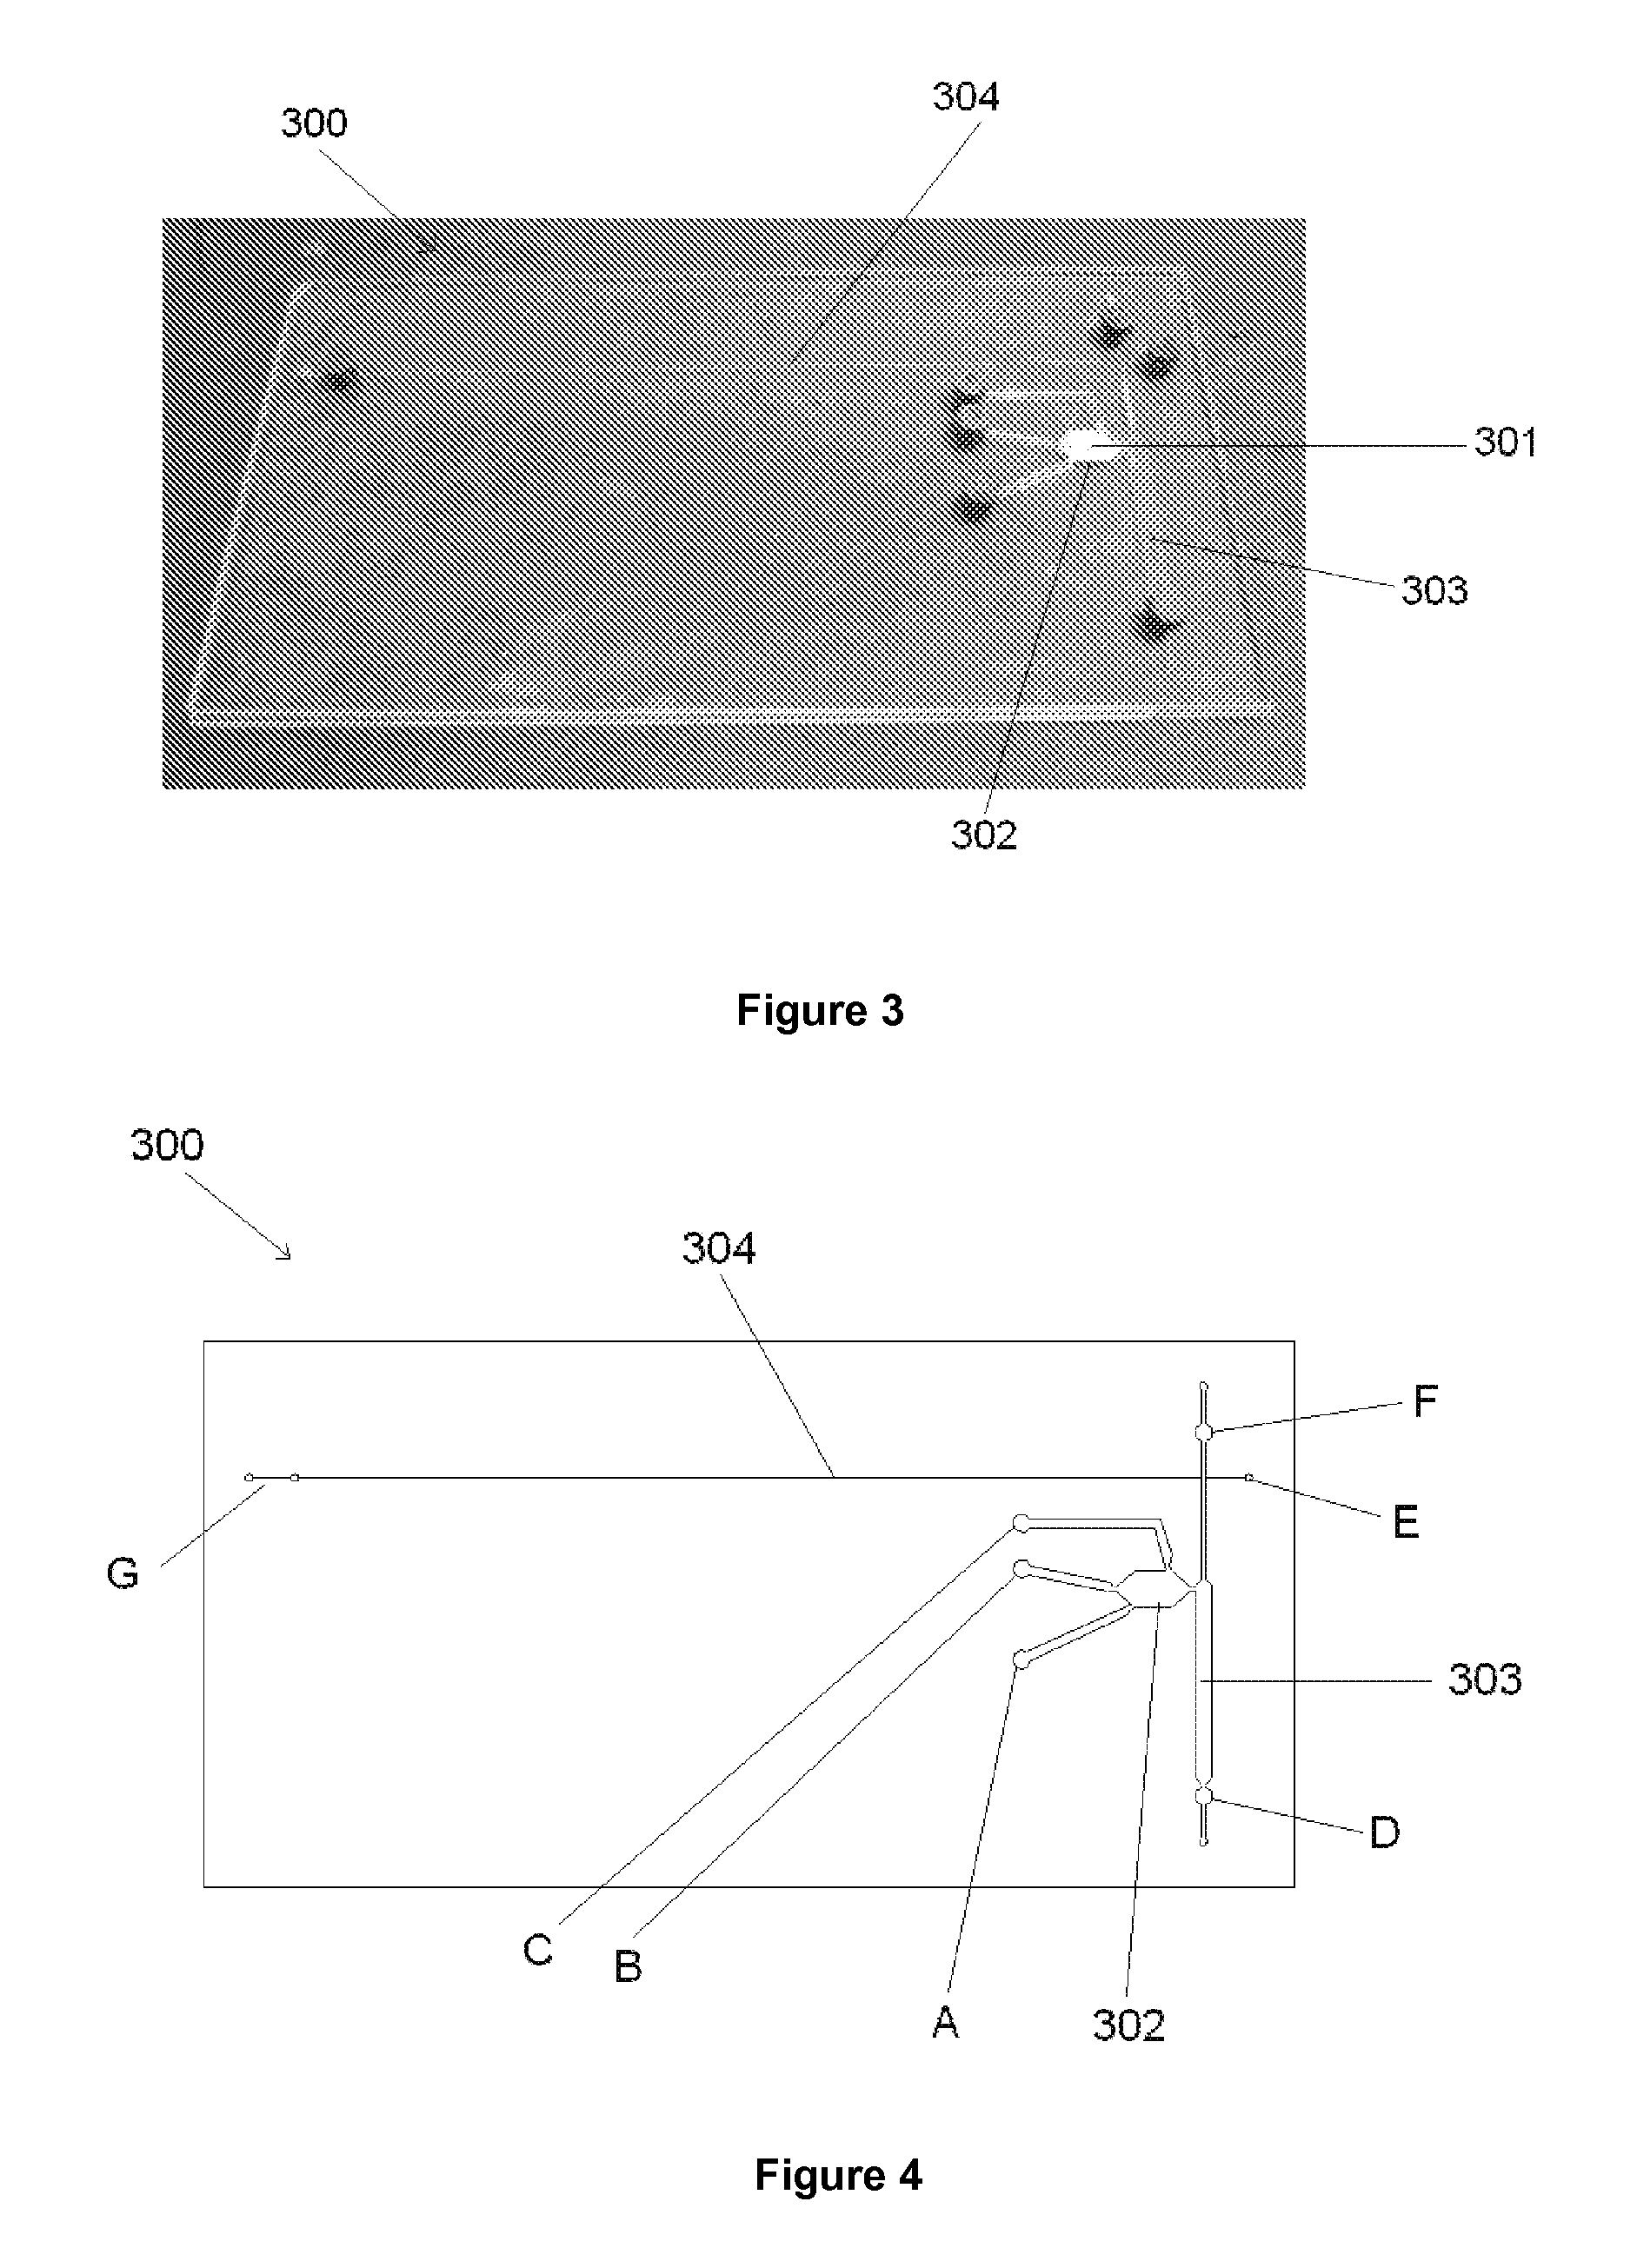 Microfluidic apparatus and method for DNA extraction, amplification and analysis